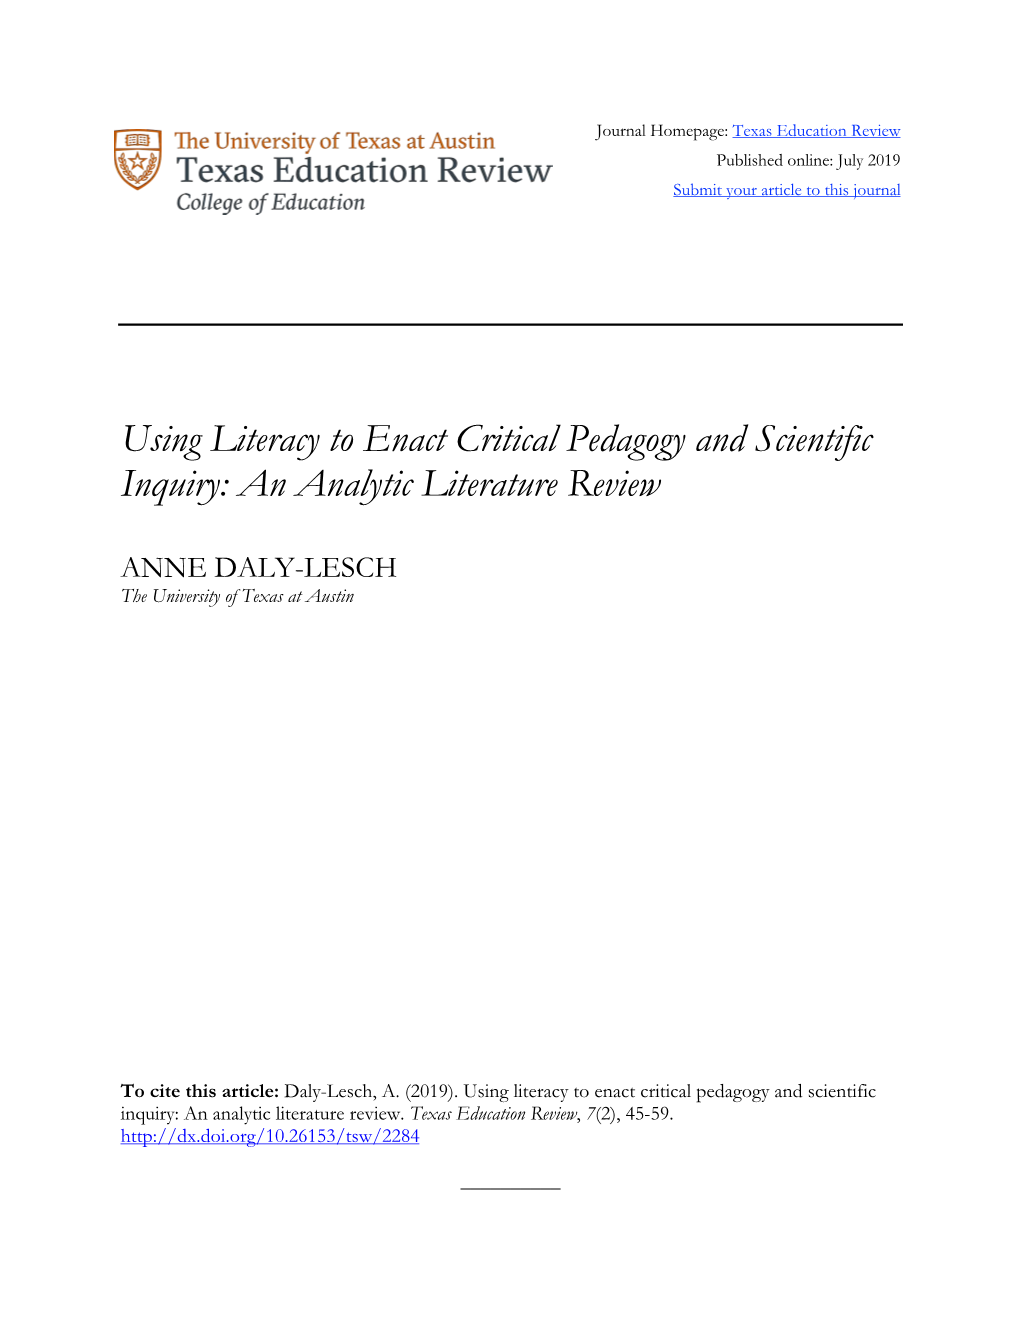 Using Literacy to Enact Critical Pedagogy and Scientific Inquiry: an Analytic Literature Review